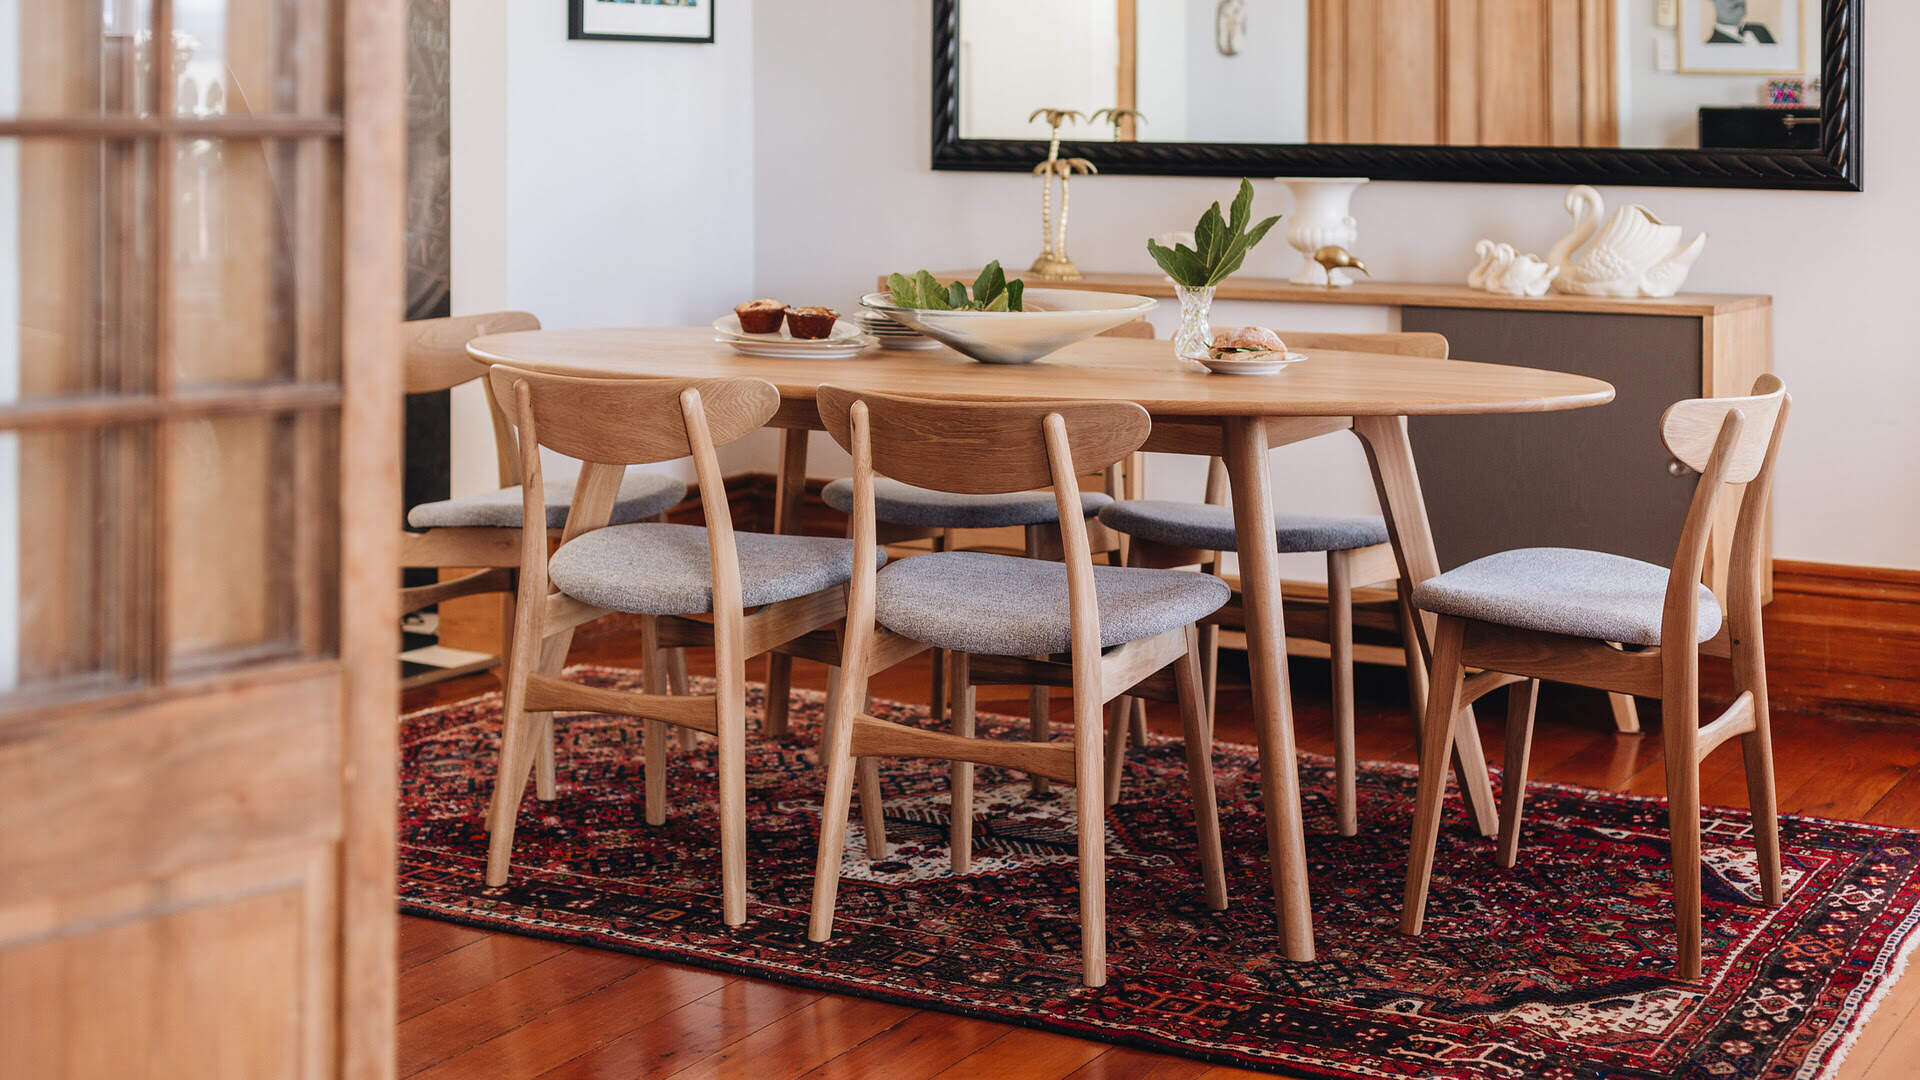 How To Style An Oval Dining Table